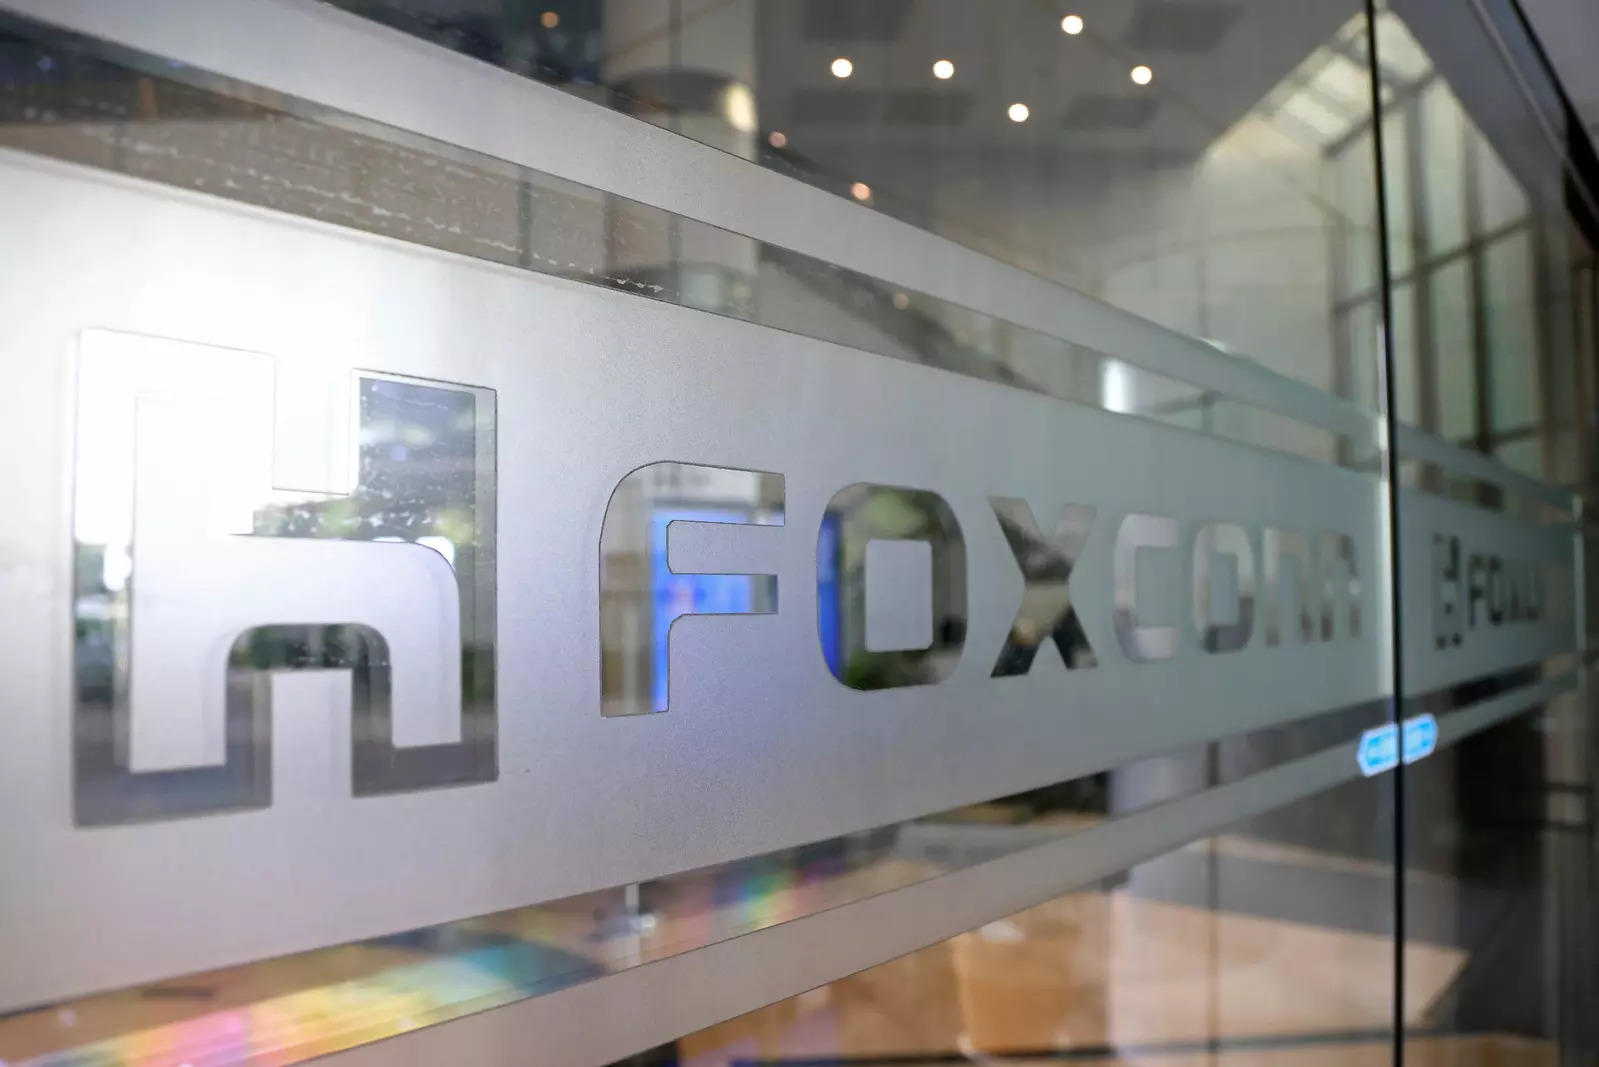 Apple and Foxconn efforts win labour reforms to advance Indian production plans: Report